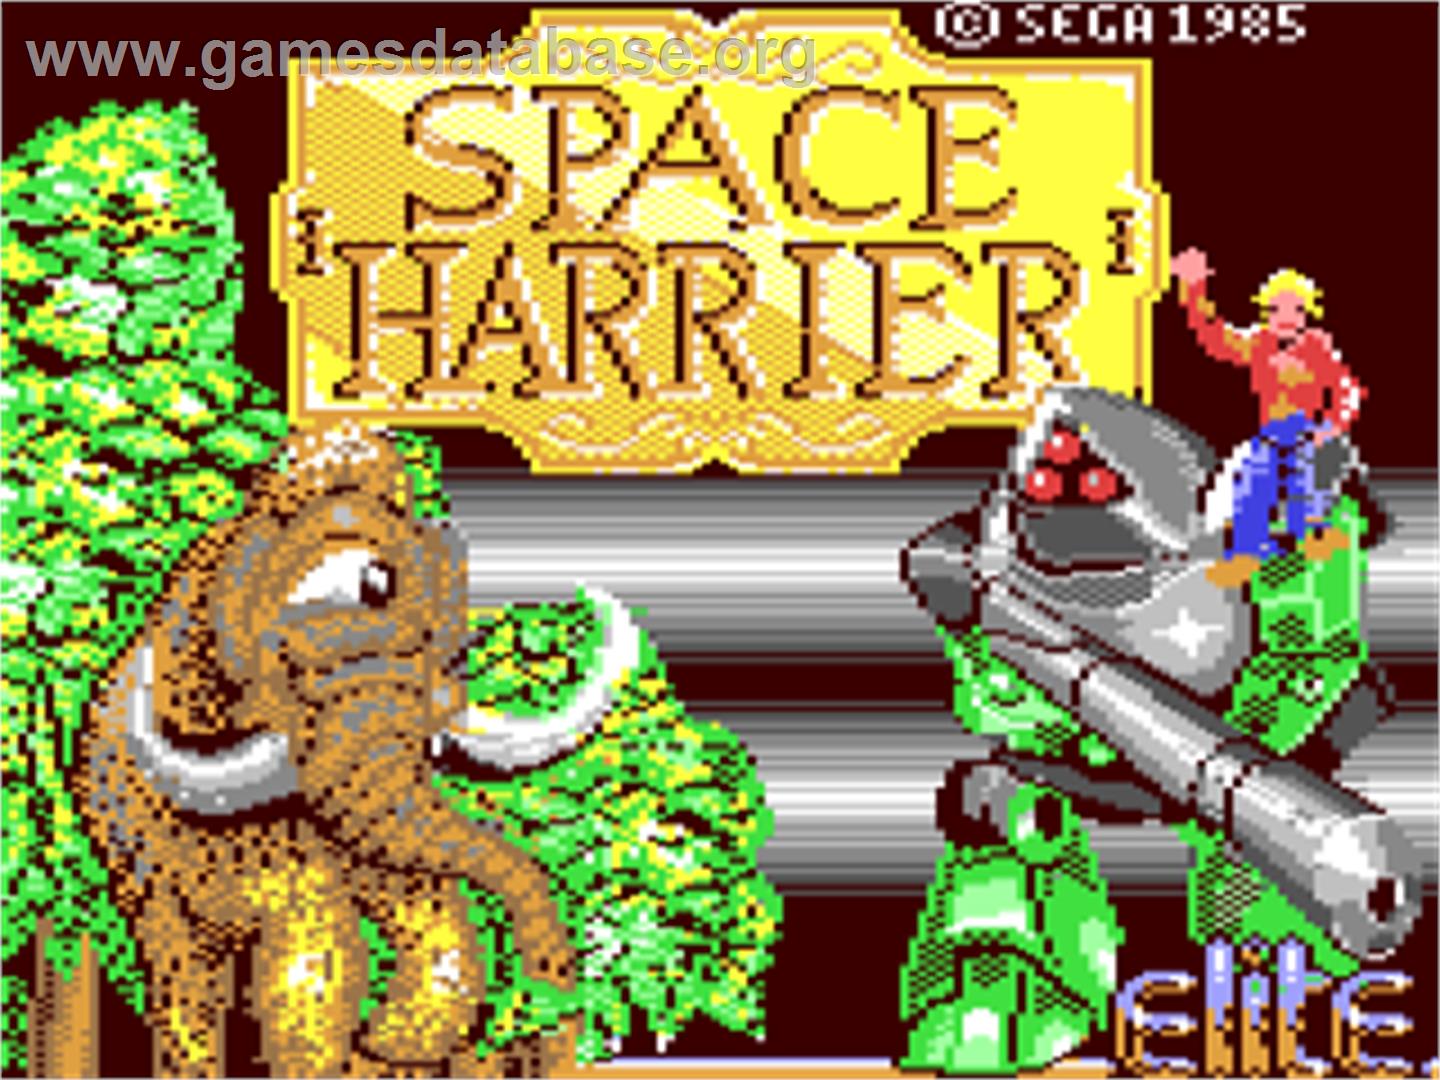 Space Harrier - Commodore 64 - Artwork - Title Screen